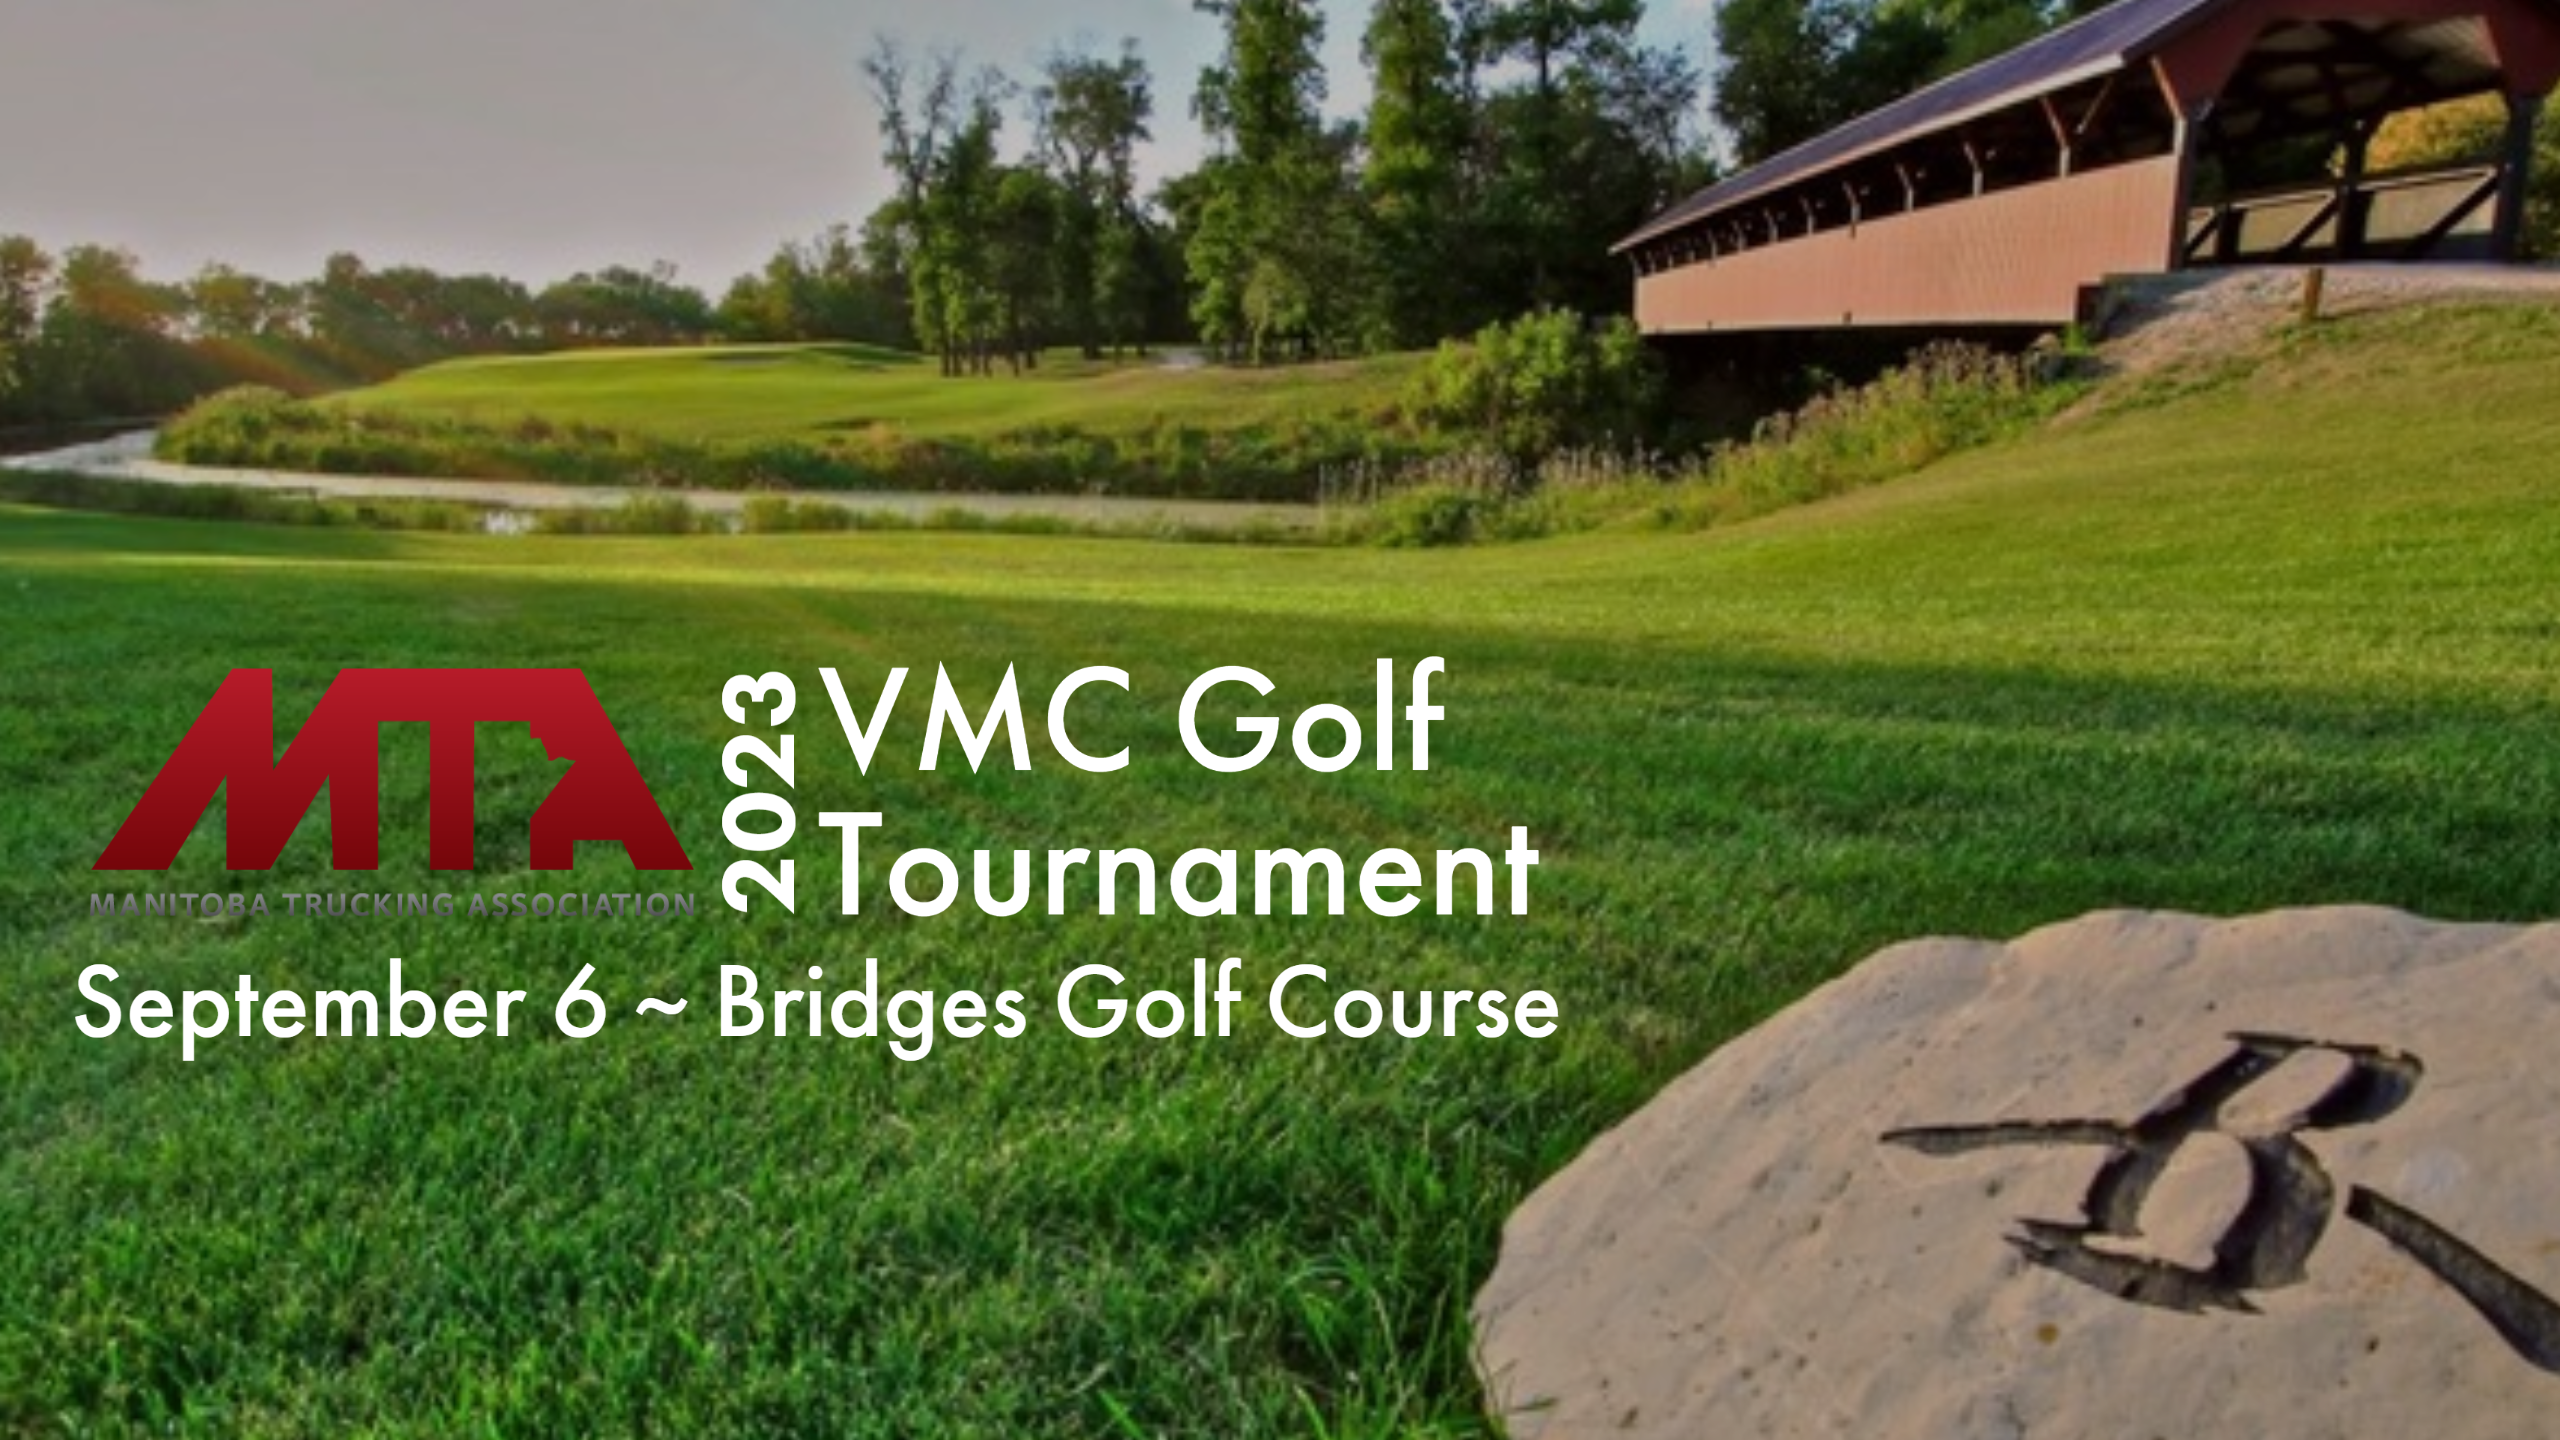 an image from Bridges Golf Course promoting the VMC Golf Tournament.